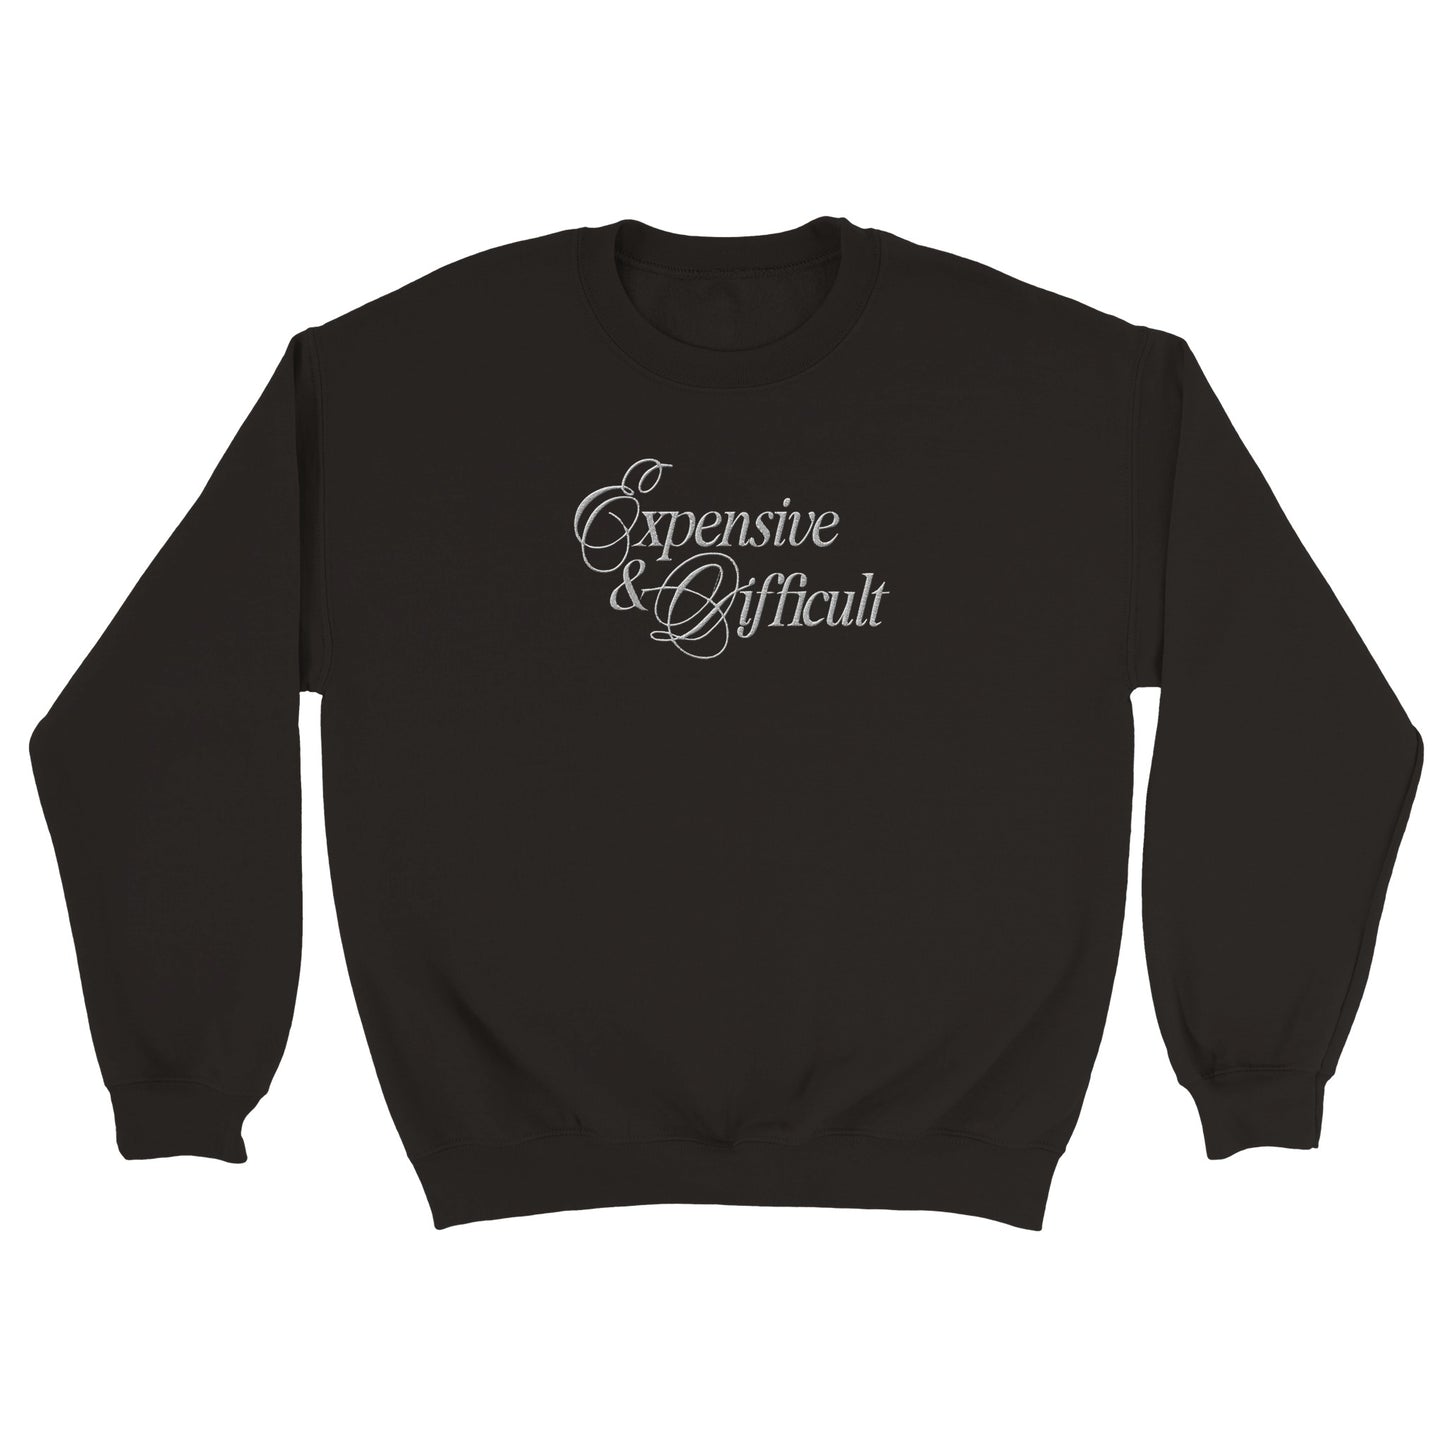 expensive and difficult embroidered on a black sweatshirt